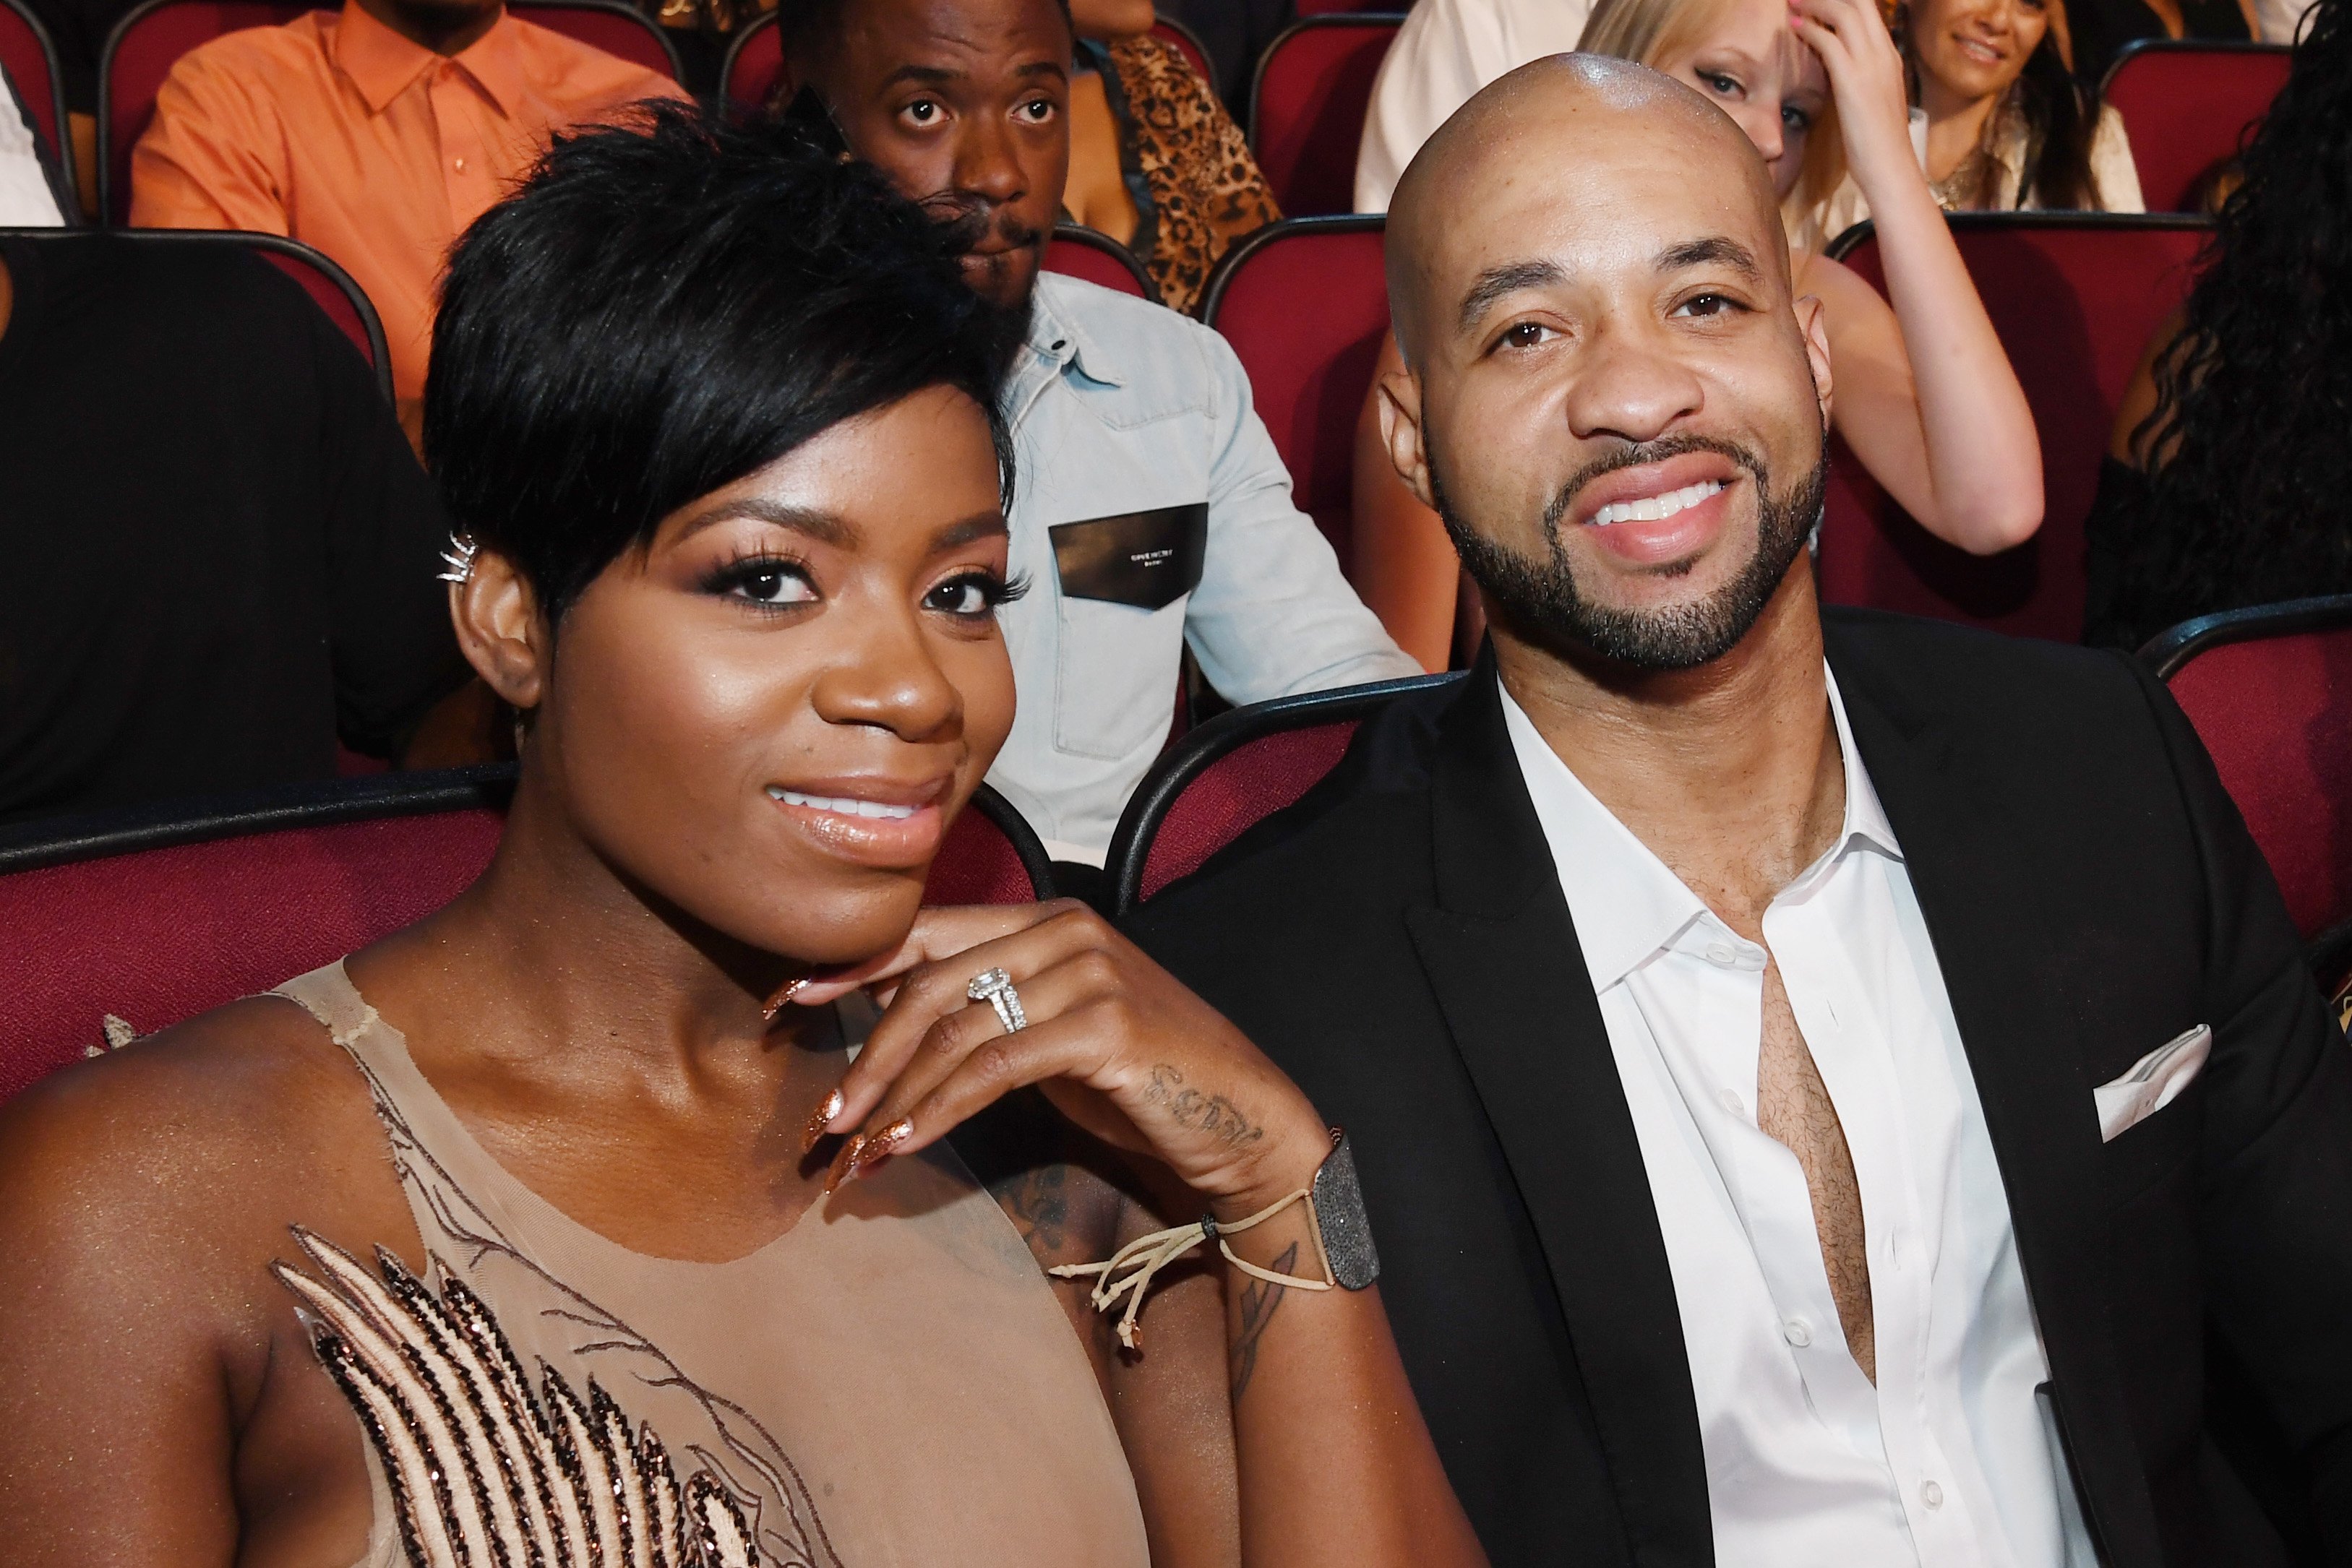 Fantasia Barrino-Taylor & her husband Kendall Taylor at the BET Awards on June 26, 2016 | Photo: Getty Images